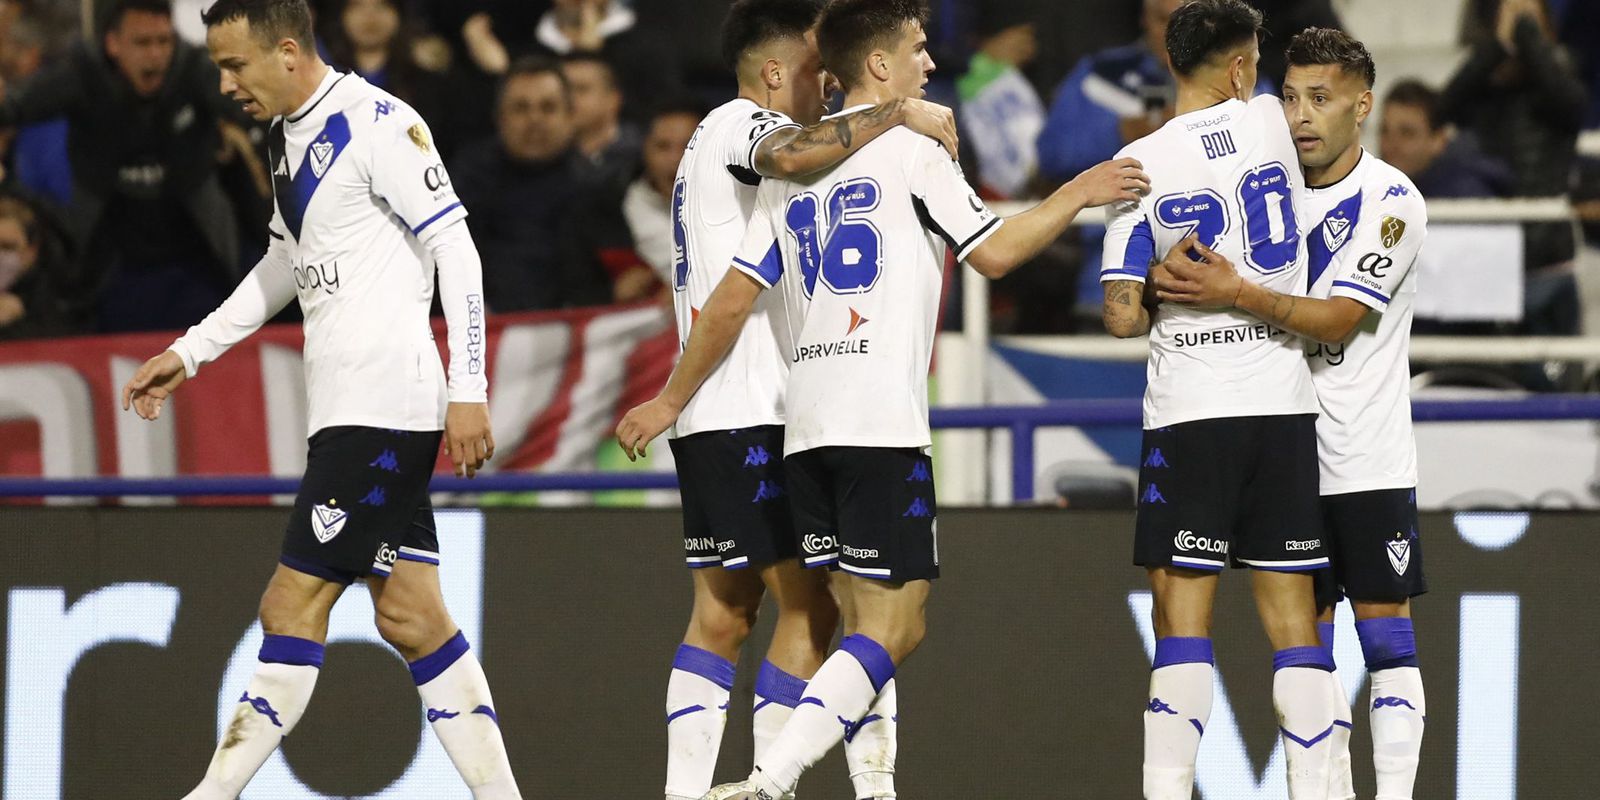 Libertadores: Vélez eliminates Talleres and takes on Flamengo in the semifinals